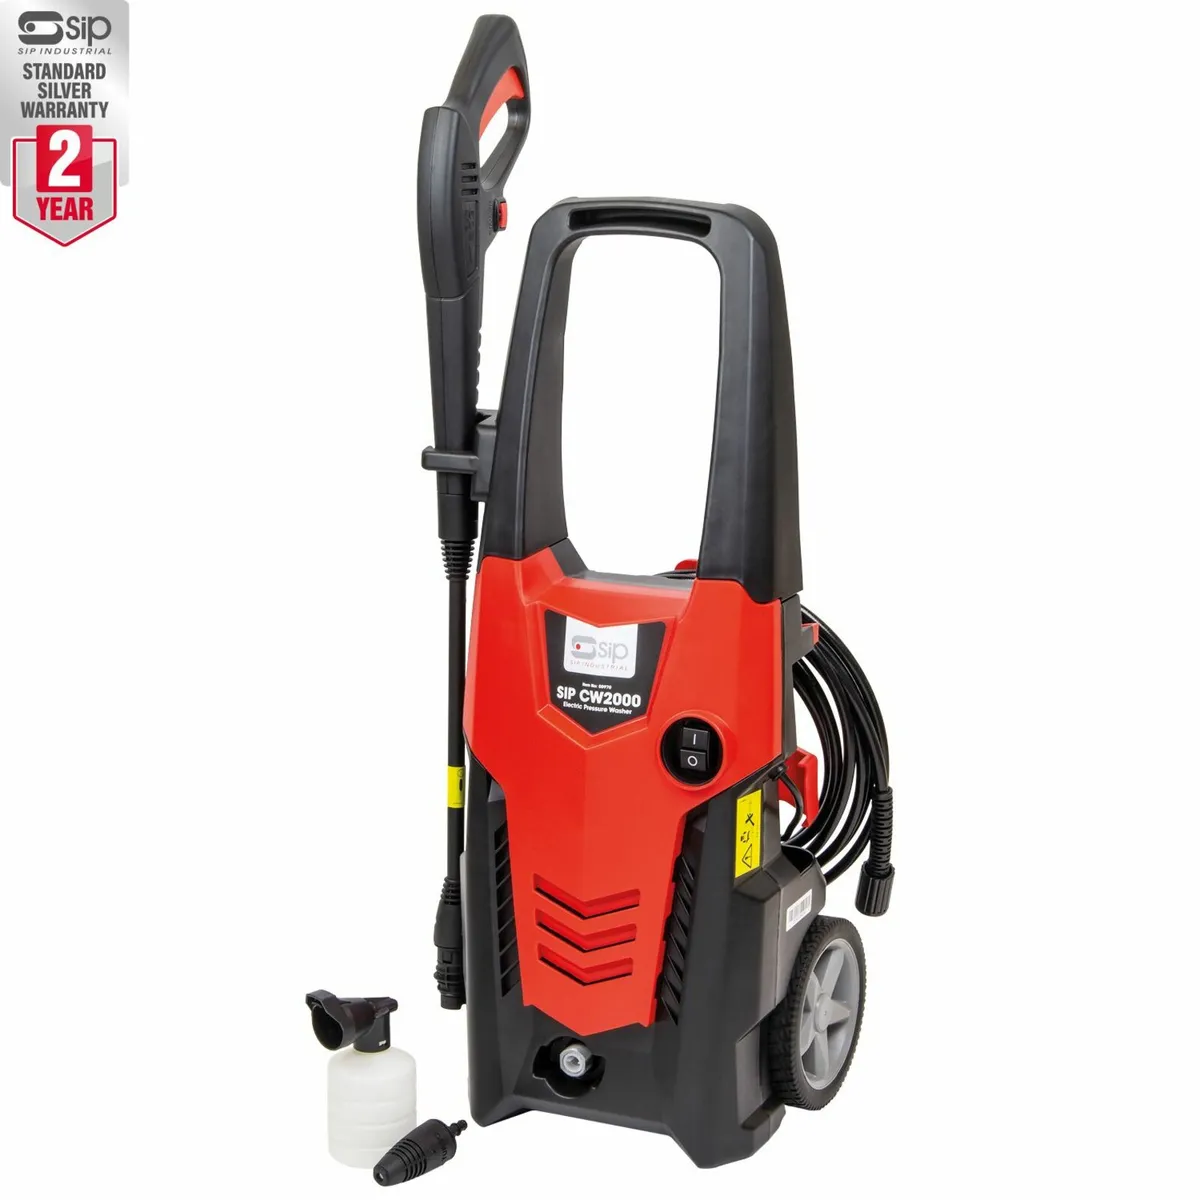 SIP CW2000 Electric Pressure Washer (2030psi)